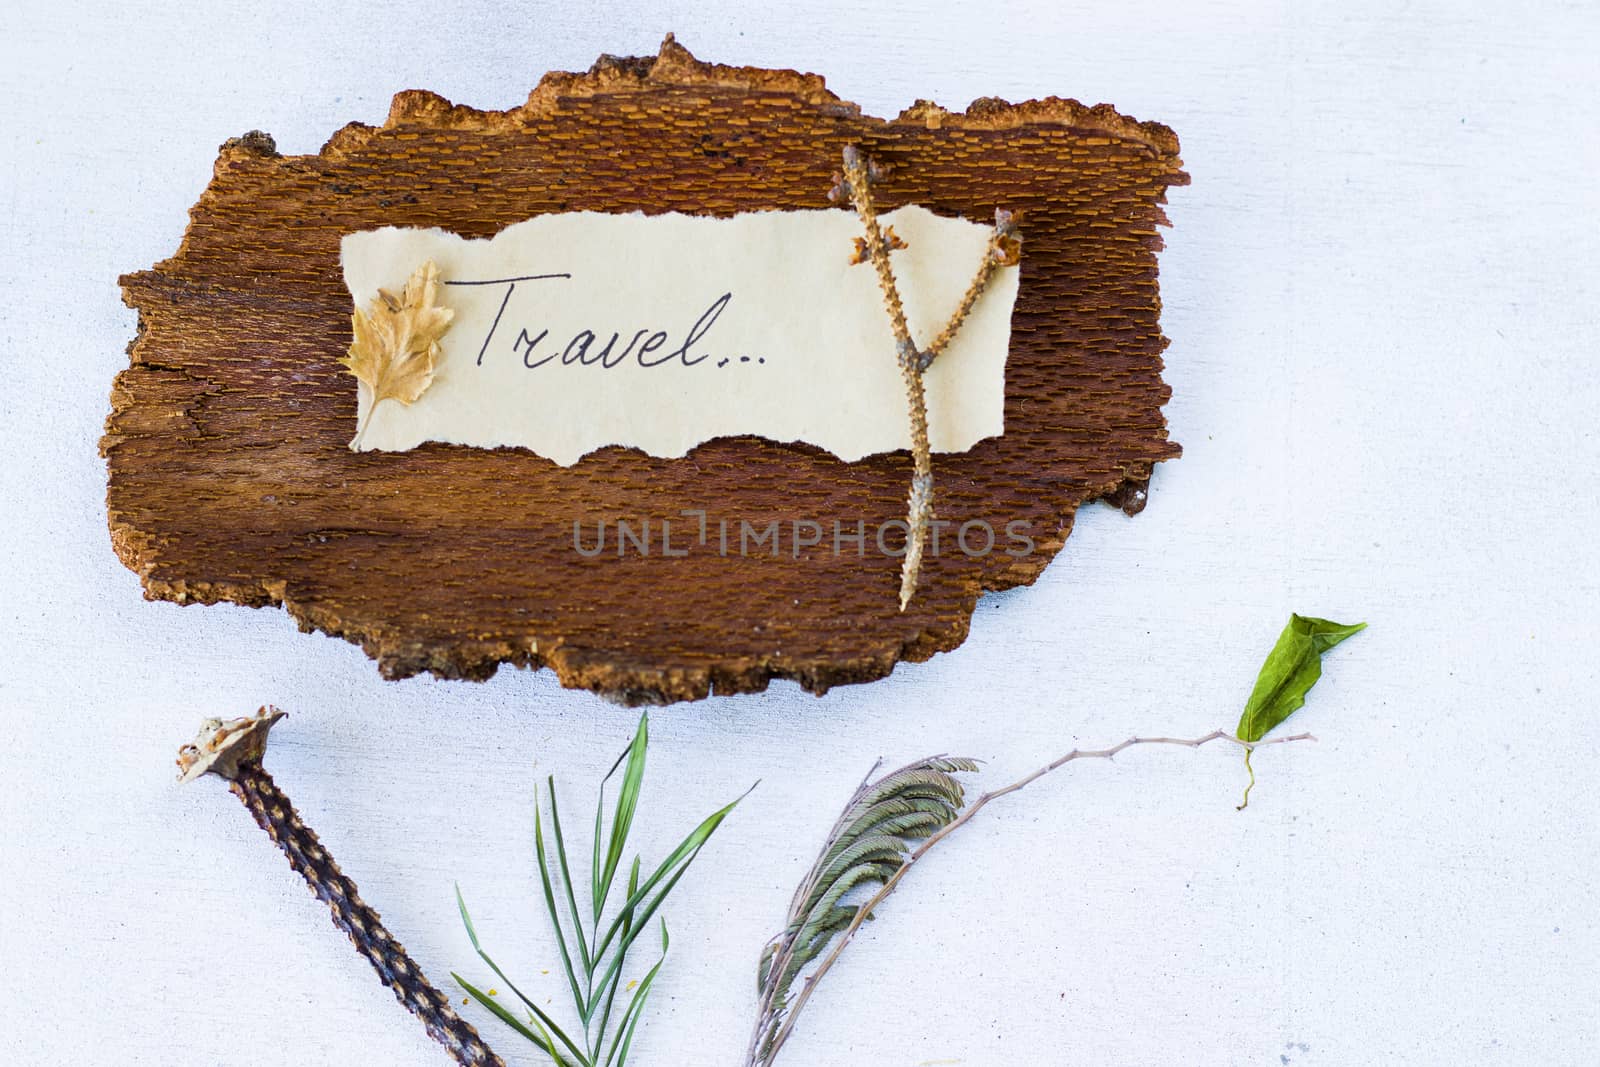 Autumn vibes travel memories, dried plants and flowers, copy paste space, letter and words on the old paper, herbarium theme.